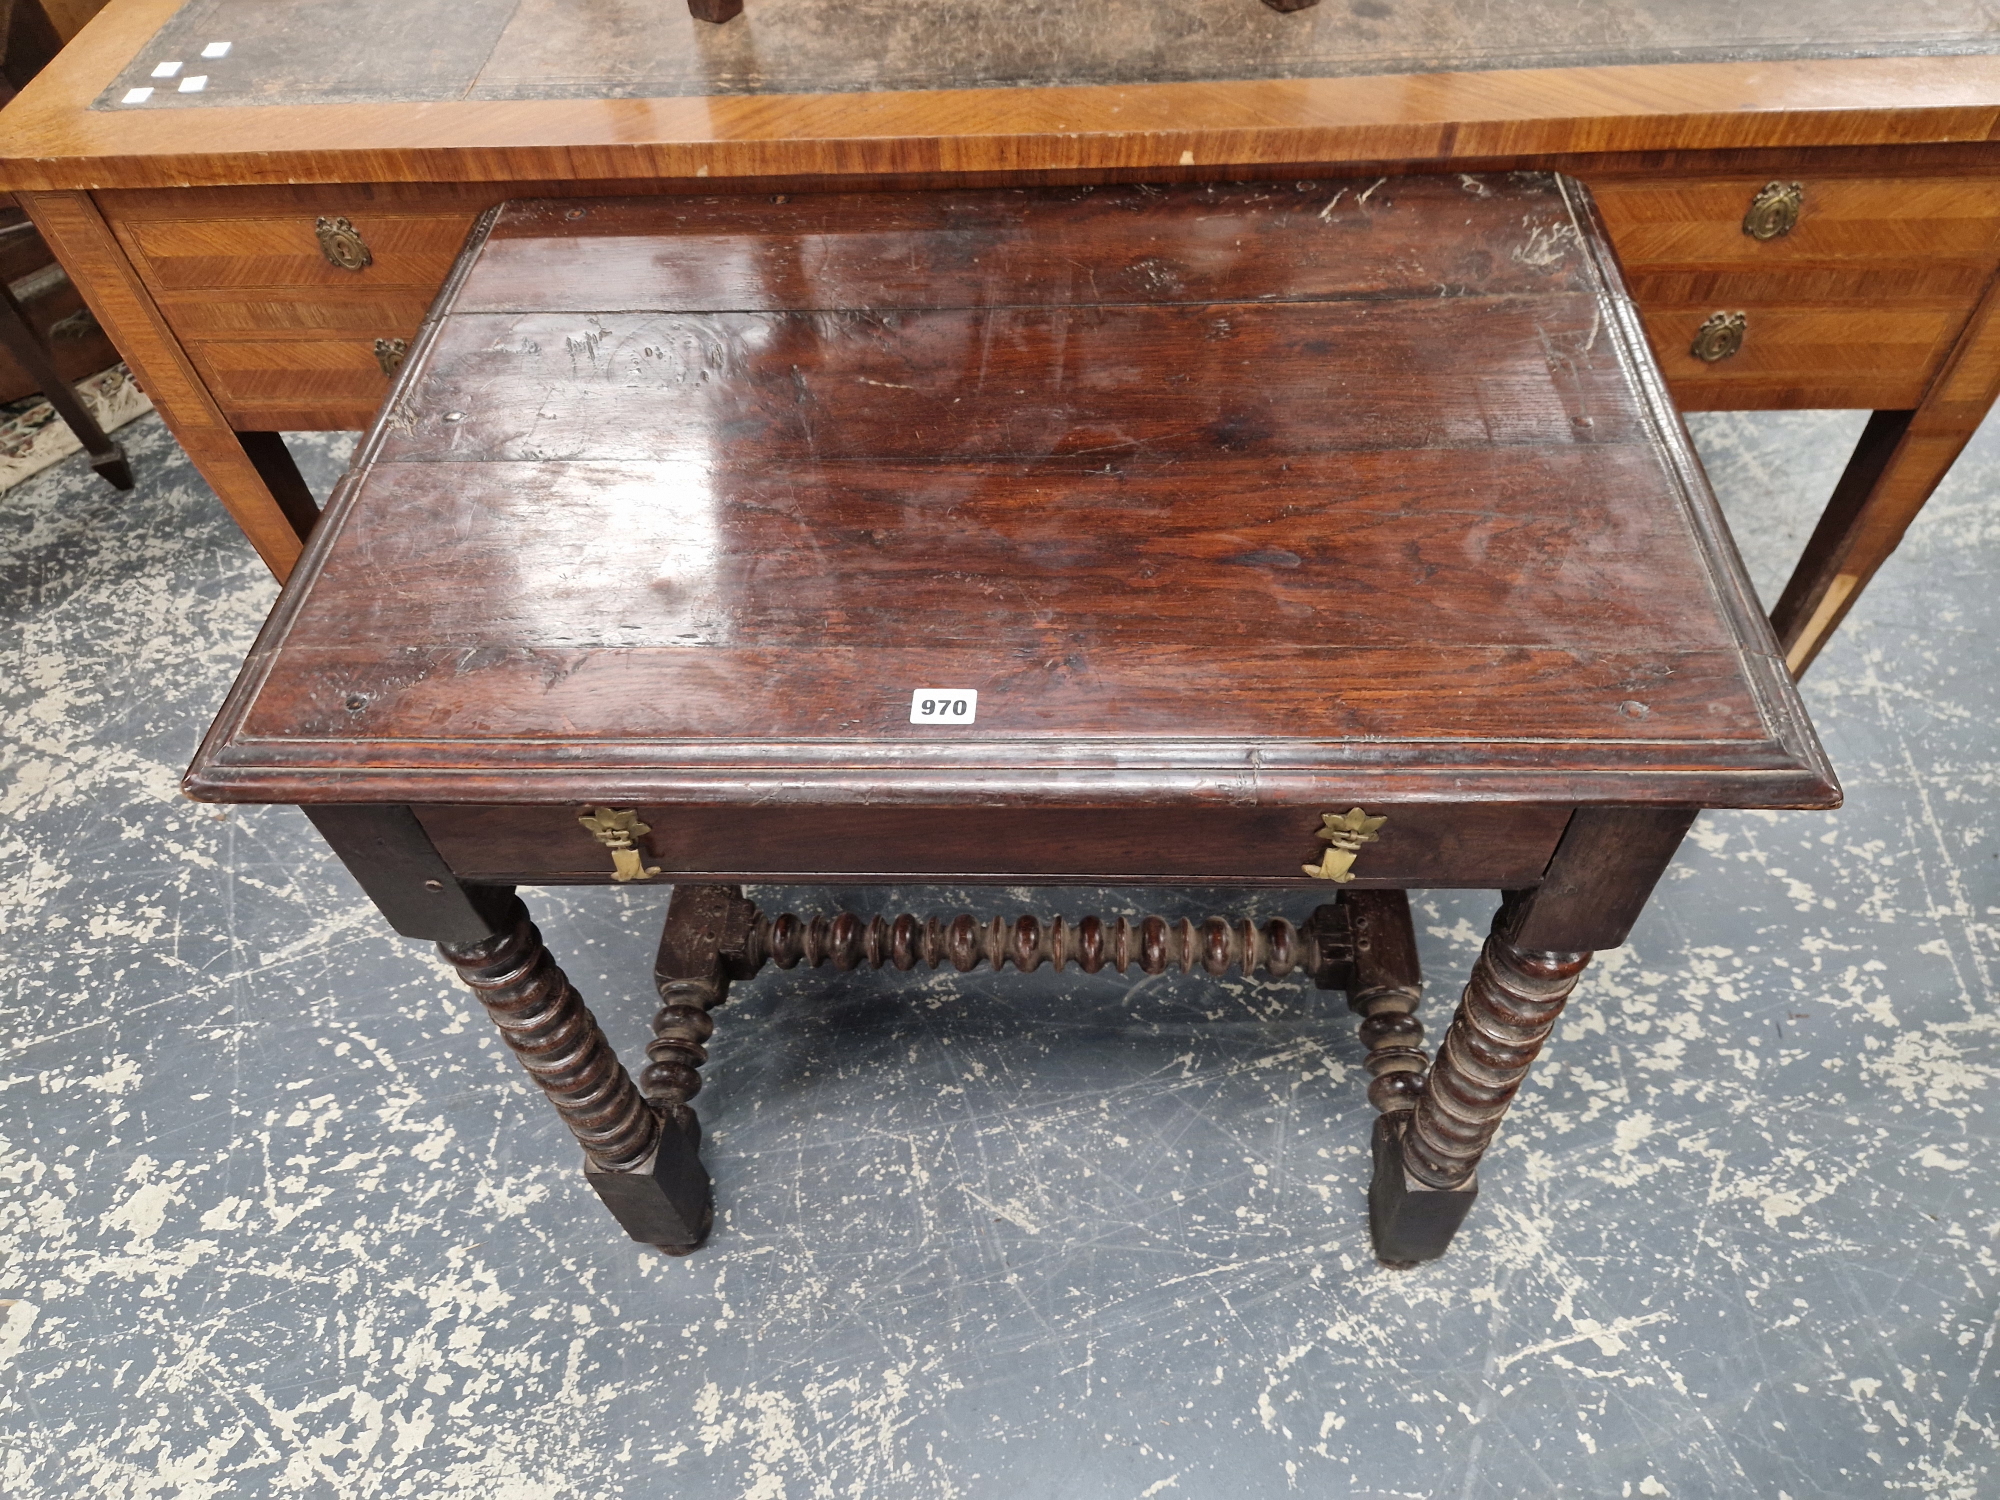 AN 18th C. OAK SIDE TABLE WITH A SINGLE DRAWER ABOVE THE RING AND BOBBIN TURNED LEGS. W 77 x 52 x - Image 2 of 5